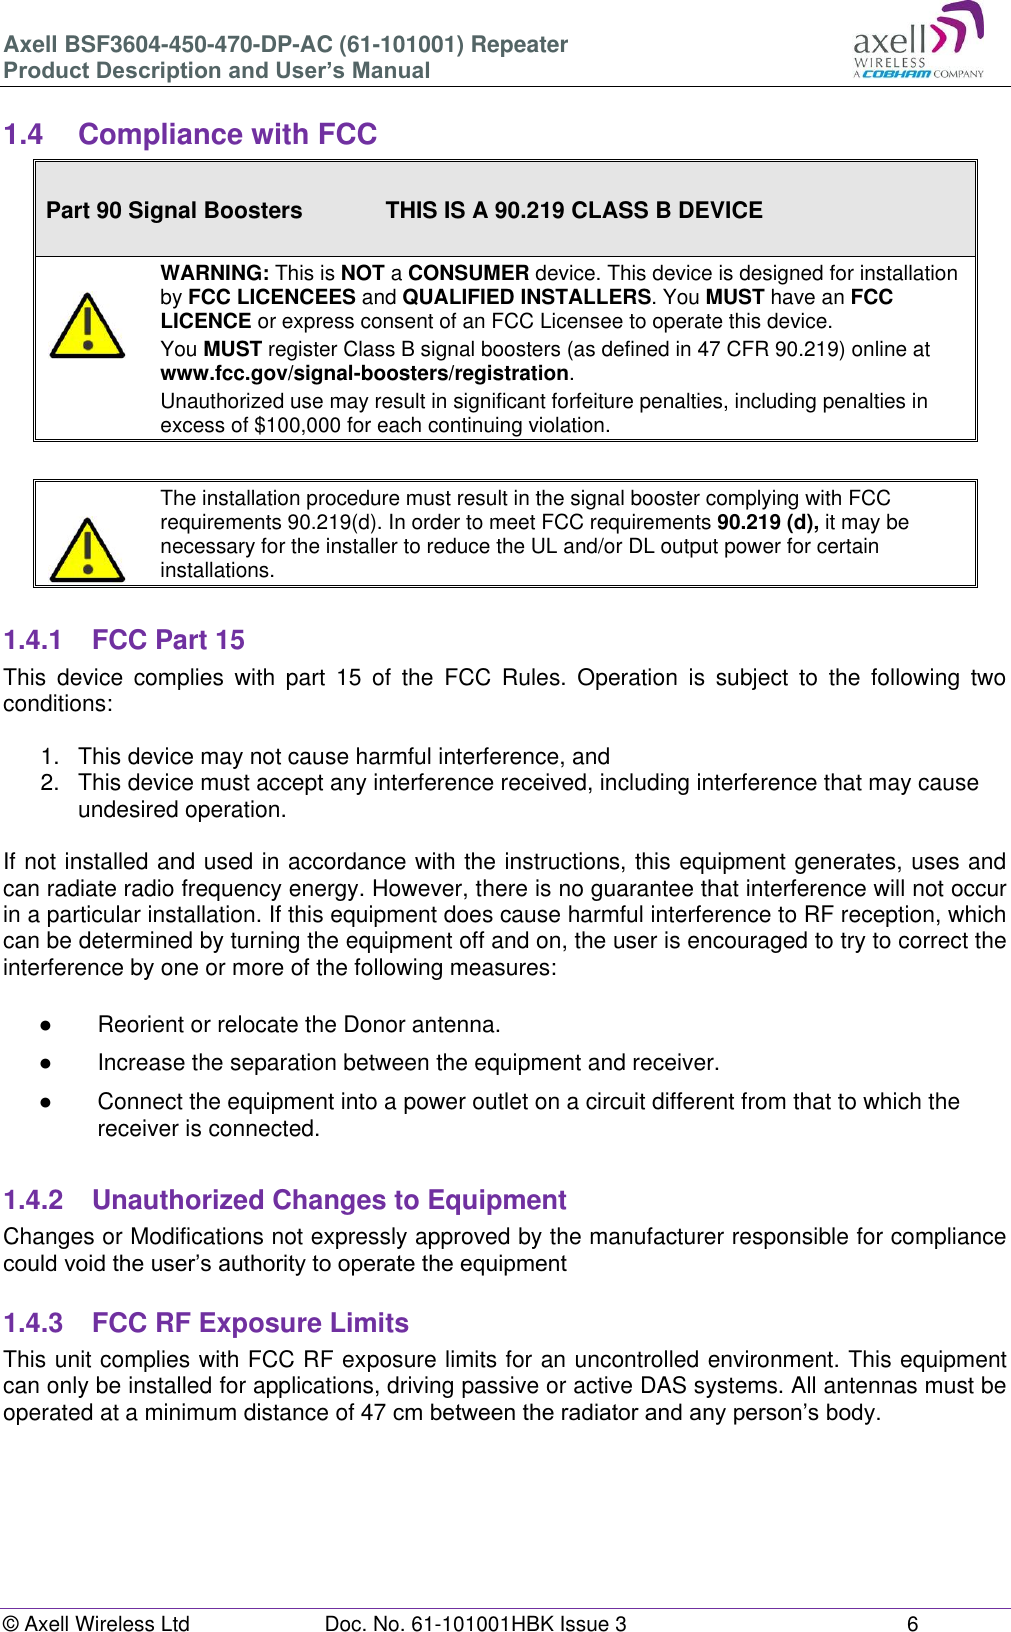 Axell BSF3604-450-470-DP-AC (61-101001) Repeater Product Description and User’s Manual © Axell Wireless Ltd  Doc. No. 61-101001HBK Issue 3  6   1.4  Compliance with FCC  Part 90 Signal Boosters             THIS IS A 90.219 CLASS B DEVICE    WARNING: This is NOT a CONSUMER device. This device is designed for installation by FCC LICENCEES and QUALIFIED INSTALLERS. You MUST have an FCC LICENCE or express consent of an FCC Licensee to operate this device.  You MUST register Class B signal boosters (as defined in 47 CFR 90.219) online at www.fcc.gov/signal-boosters/registration.  Unauthorized use may result in significant forfeiture penalties, including penalties in excess of $100,000 for each continuing violation.      The installation procedure must result in the signal booster complying with FCC requirements 90.219(d). In order to meet FCC requirements 90.219 (d), it may be necessary for the installer to reduce the UL and/or DL output power for certain installations.    1.4.1  FCC Part 15 This  device  complies  with  part  15  of  the  FCC  Rules.  Operation  is  subject  to  the  following  two conditions:   1.  This device may not cause harmful interference, and   2.  This device must accept any interference received, including interference that may cause undesired operation.   If not installed and used in accordance with the instructions, this equipment generates, uses and can radiate radio frequency energy. However, there is no guarantee that interference will not occur in a particular installation. If this equipment does cause harmful interference to RF reception, which can be determined by turning the equipment off and on, the user is encouraged to try to correct the interference by one or more of the following measures:  ●  Reorient or relocate the Donor antenna. ●  Increase the separation between the equipment and receiver. ●  Connect the equipment into a power outlet on a circuit different from that to which the receiver is connected.  1.4.2  Unauthorized Changes to Equipment Changes or Modifications not expressly approved by the manufacturer responsible for compliance could void the user’s authority to operate the equipment  1.4.3  FCC RF Exposure Limits This unit complies with FCC RF exposure limits for an uncontrolled environment. This equipment can only be installed for applications, driving passive or active DAS systems. All antennas must be operated at a minimum distance of 47 cm between the radiator and any person’s body.     